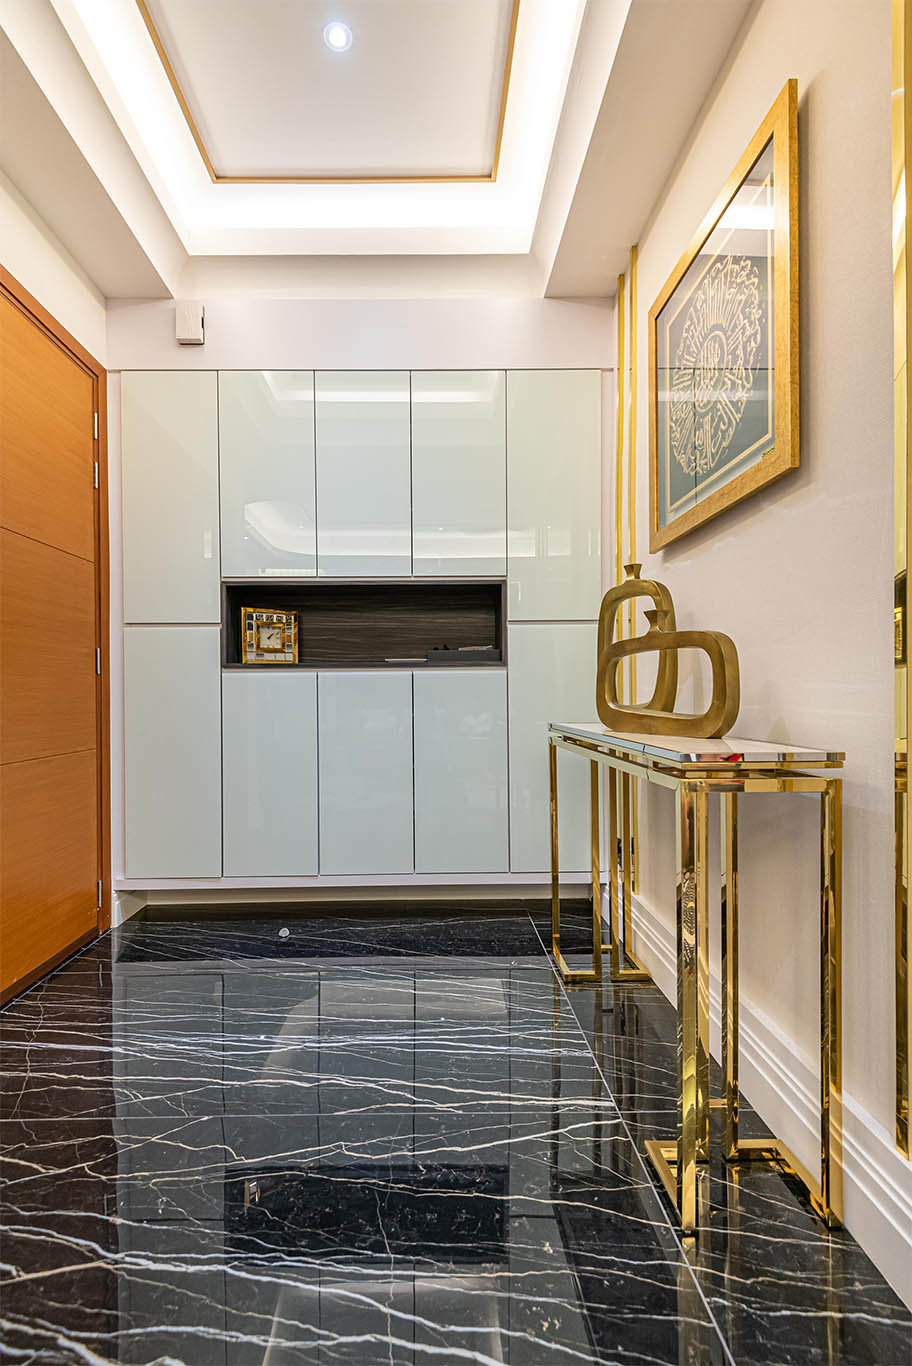 Luxurious hallway with Islamic Art with gold frame, hidden light, black marble tiles, and white minimalist cabinet